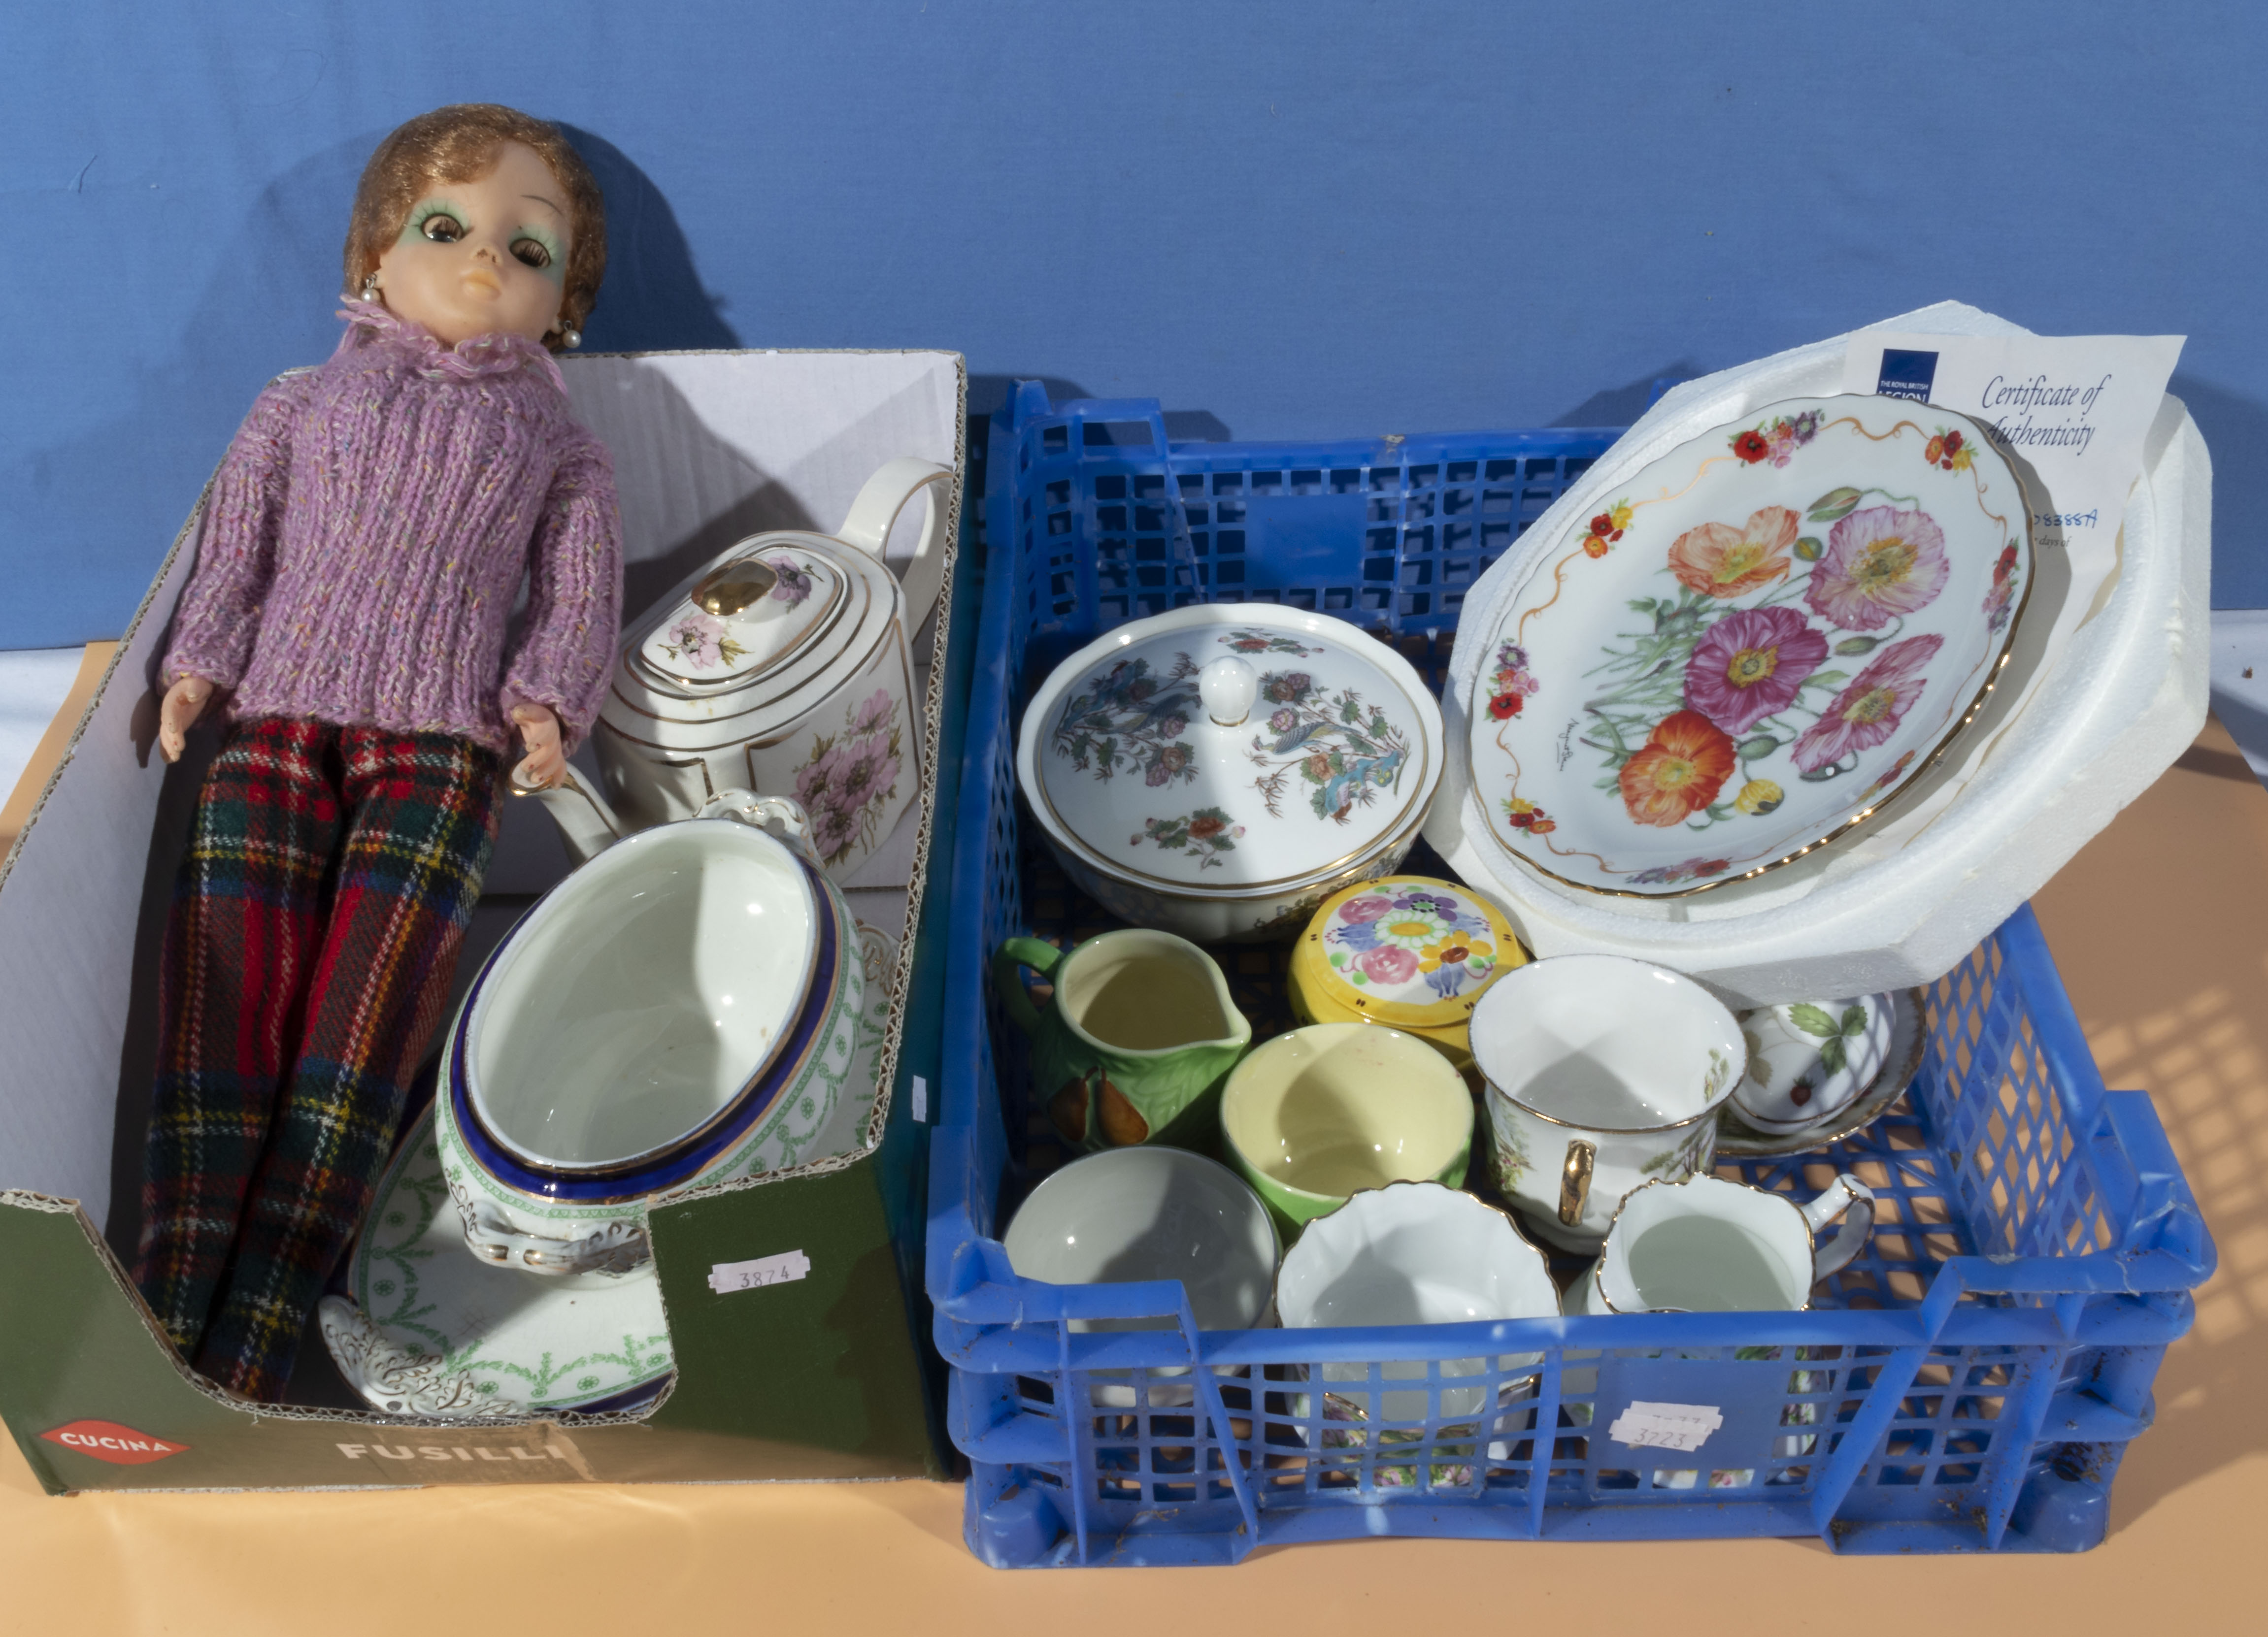 A box of china and a doll